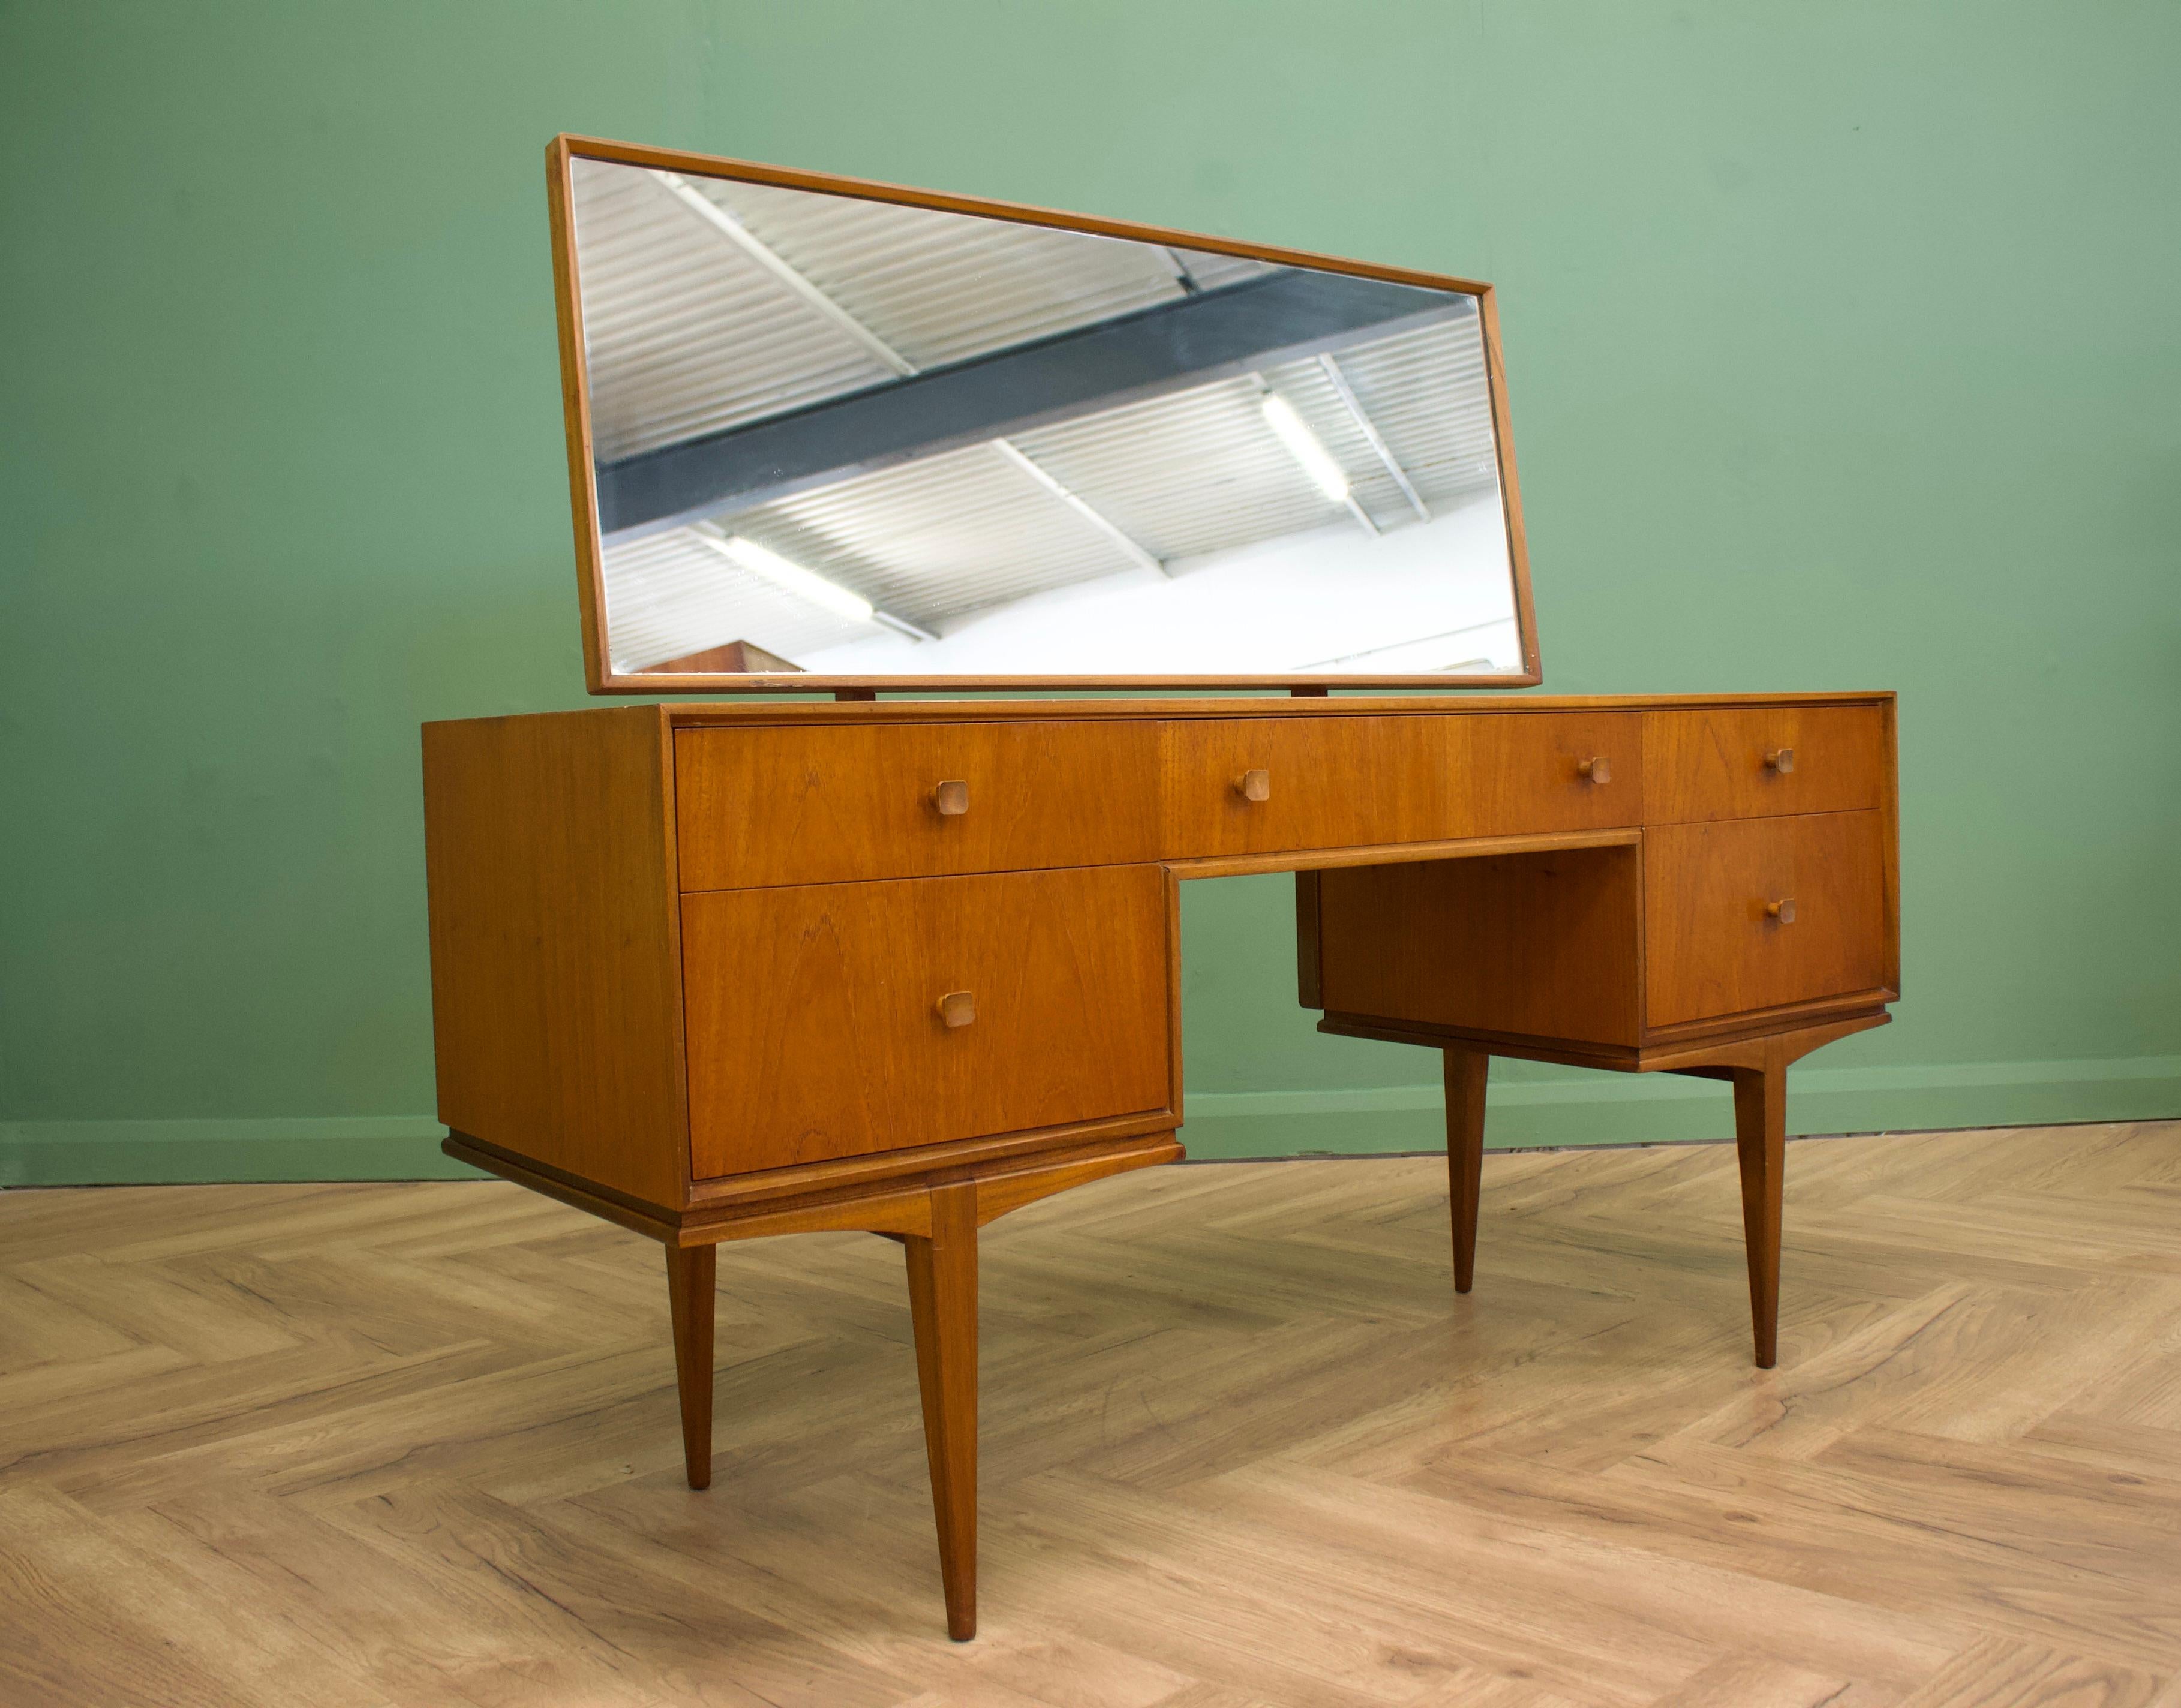 - Mid century dressing table and stool
- Manufactured in the UK by McIntosh
- Made from Teak & Teak Veneer.

- Featuring 5 drawers.